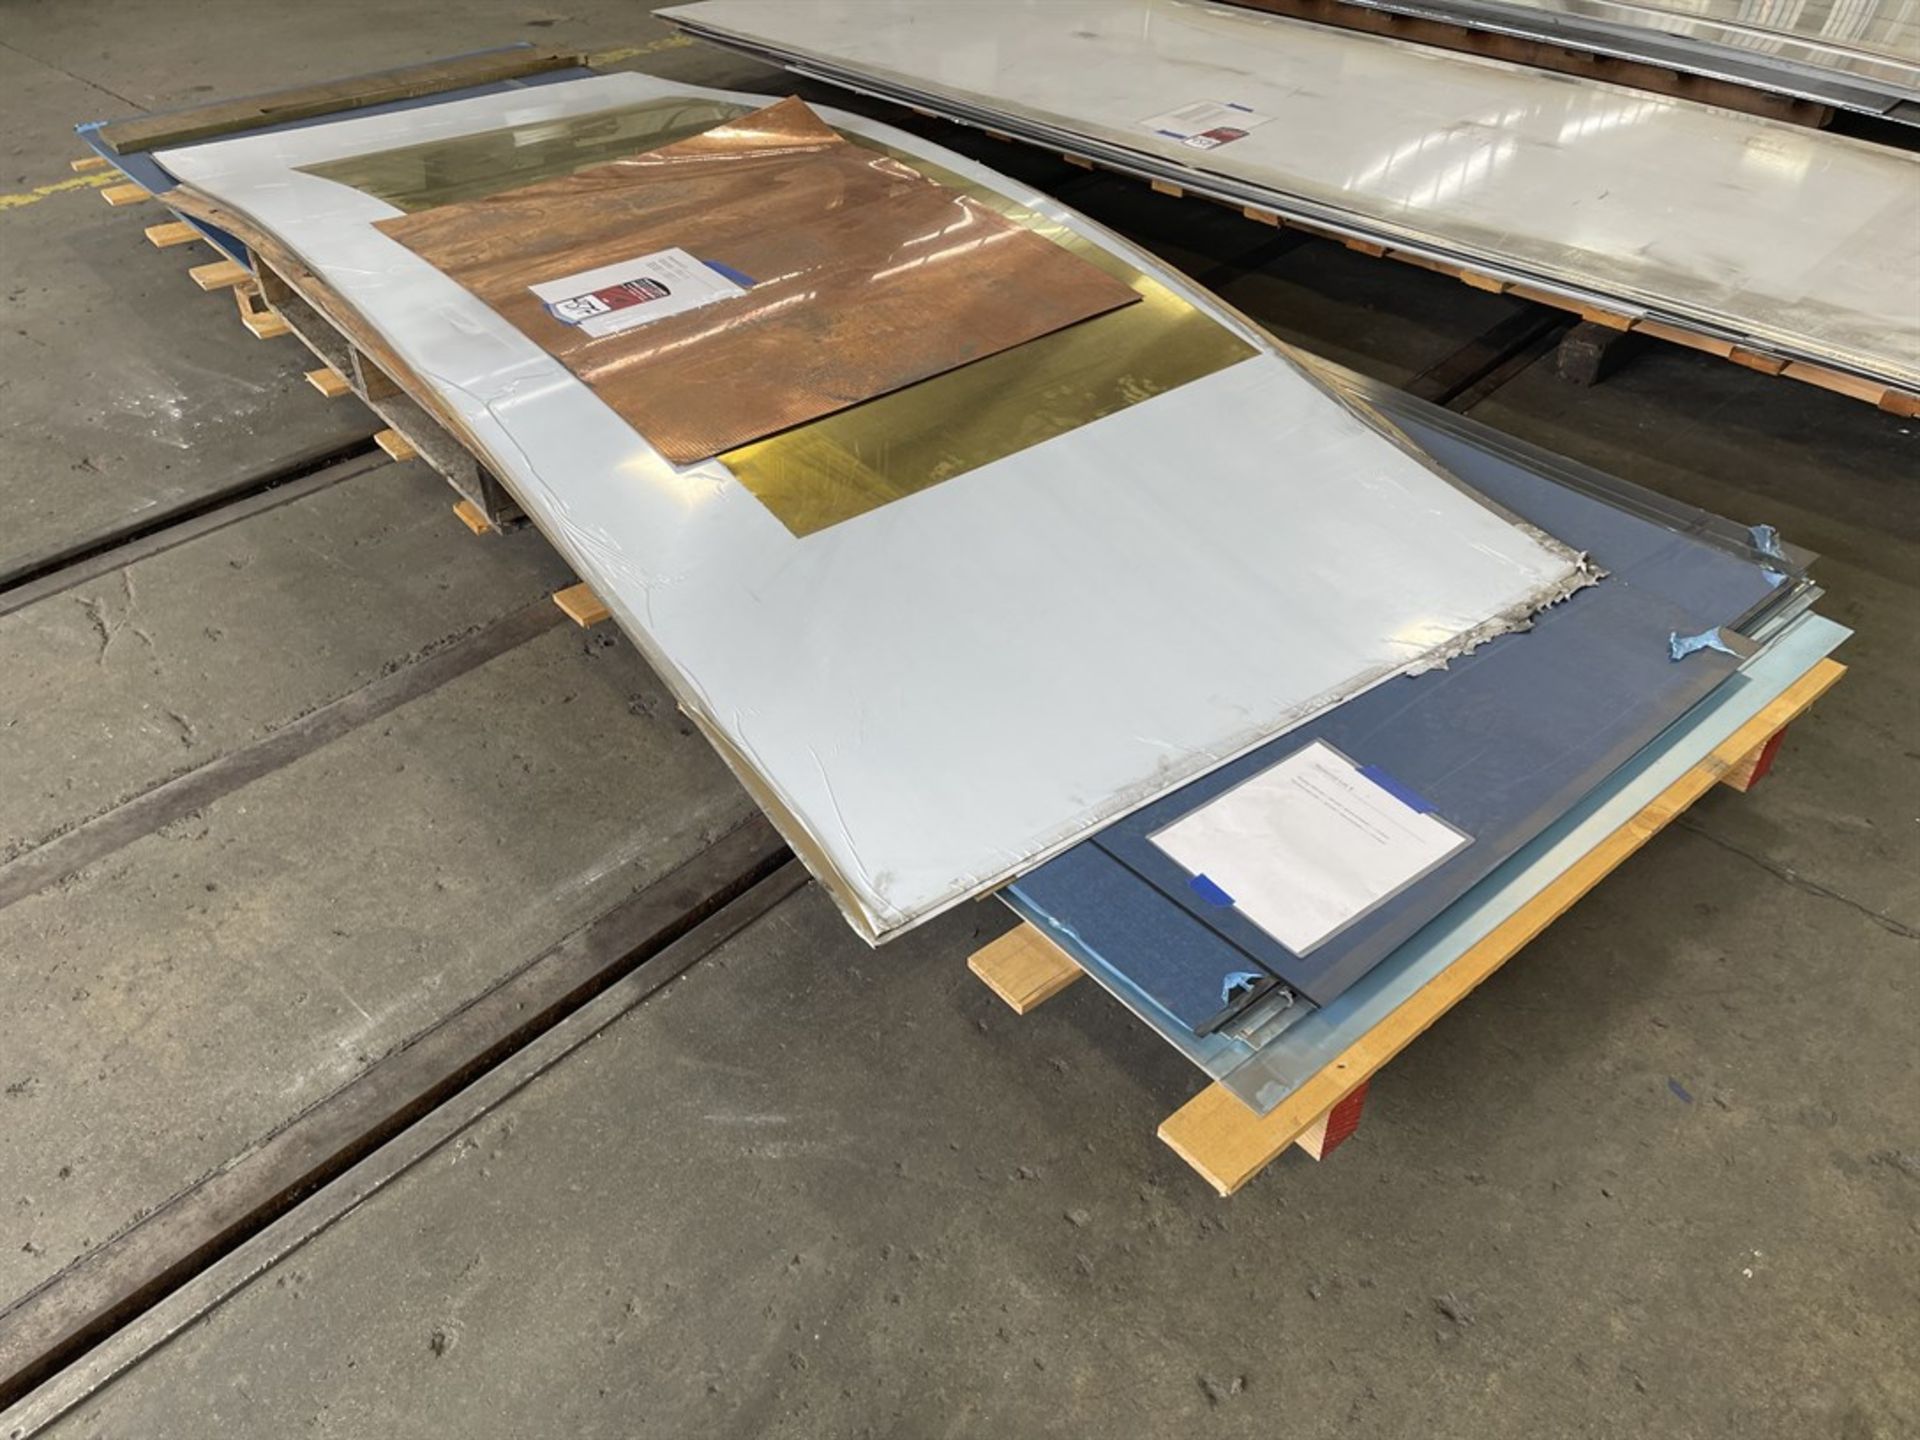 Lot of Assorted Sheet Stock Including Bronze and Clear Anodized 5052 Aluminum Sheet, Copper and